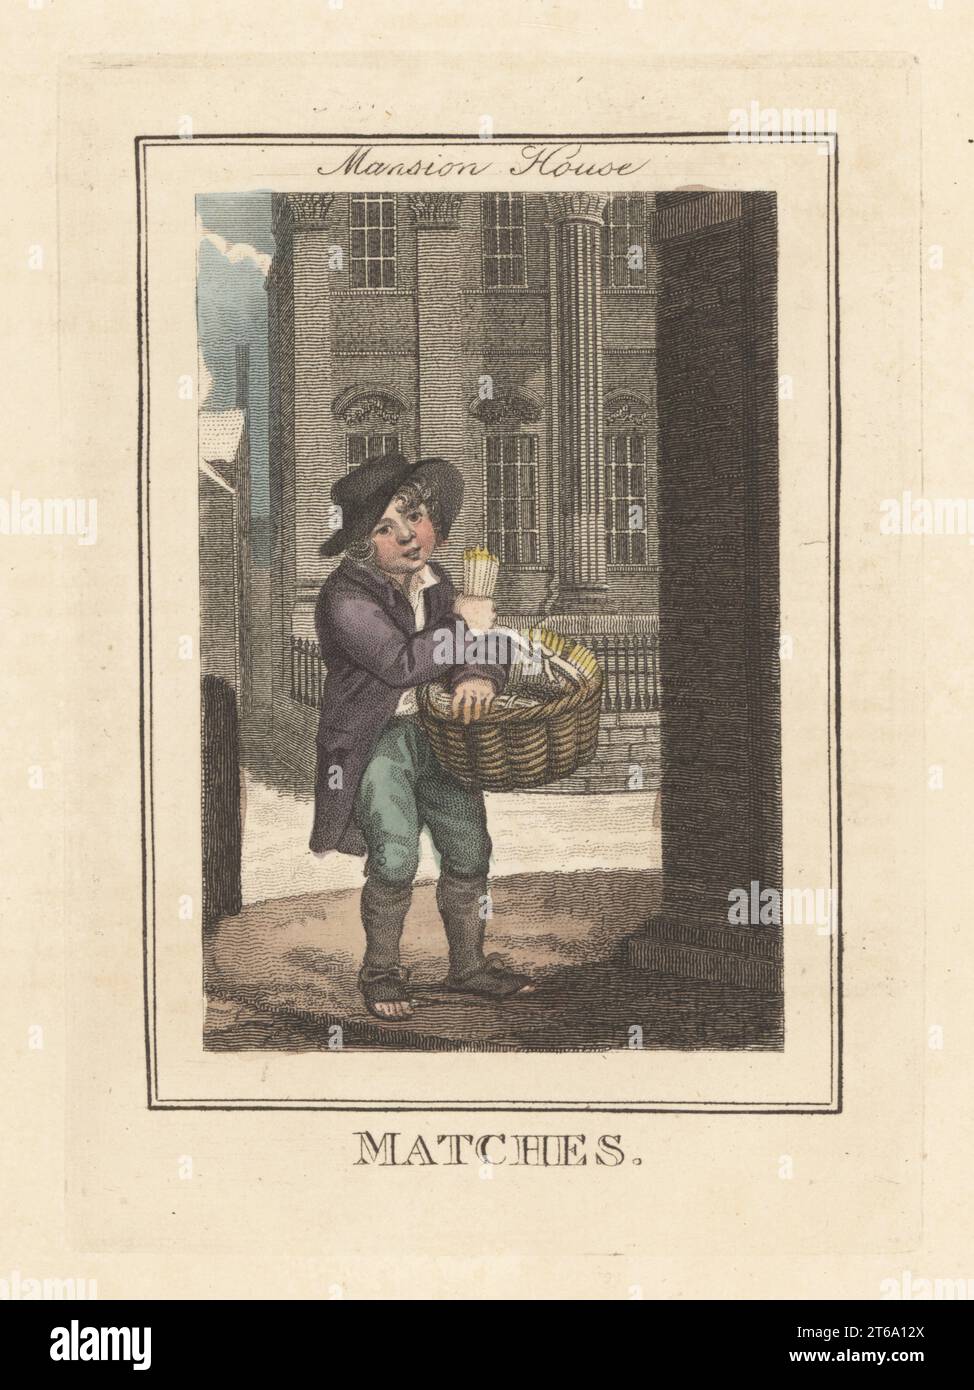 Boy selling matches in front of Mansion House. Matchseller in hat, coat, breeches and toe-less shoes with basket of matches. The Palladian-style Mantion House was designed by George Dance as the Lord Mayor's residence. Handcoloured copperplate engraving by Edward Edwards after an illustration by William Marshall Craig from Description of the Plates Representing the Itinerant Traders of London, Richard Phillips, No. 71 St Pauls Churchyard, London, 1805. Stock Photo